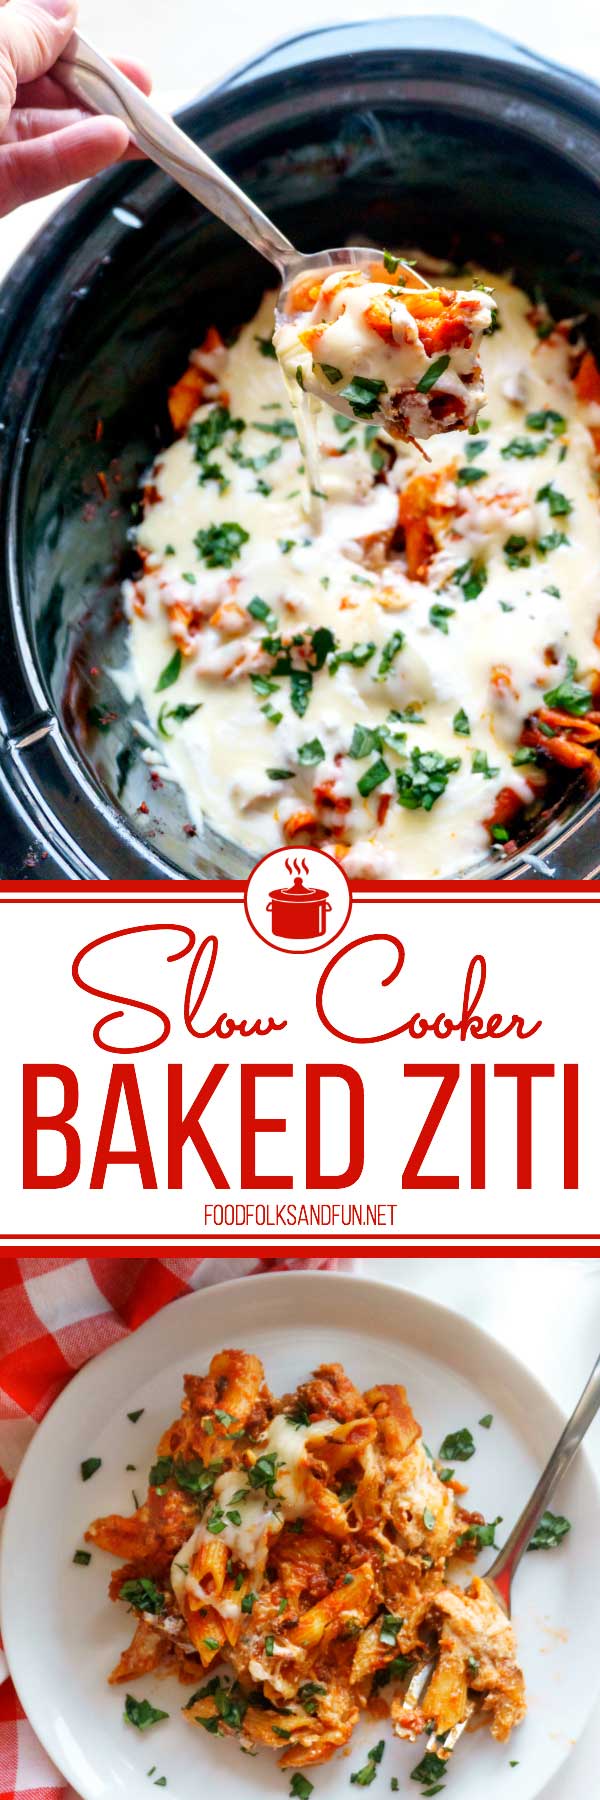 This Slow Cooker Baked Ziti recipe is the perfect dinner recipe for year-round cooking. It’s great for weeknight dinners and for company! Plus, it tastes pretty amazing--I mean just look at all of that melty cheese! #slowcooker #crockpot #dinner #pasta #carbs #ItalianFood #ItalianRecipe #foodfolksandfun via @foodfolksandfun